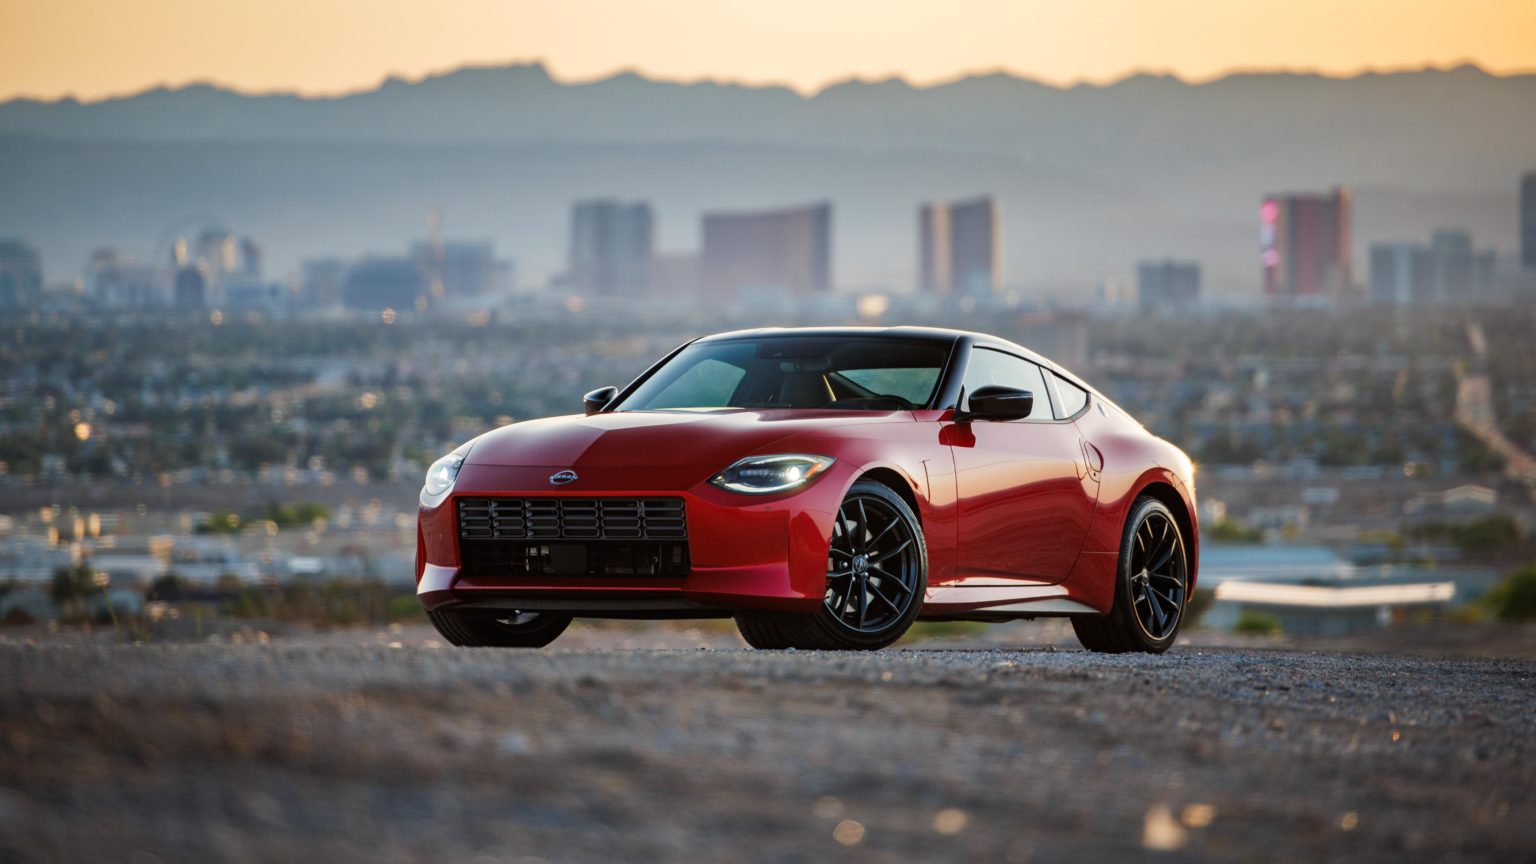 The new Z starts at under $40,000.